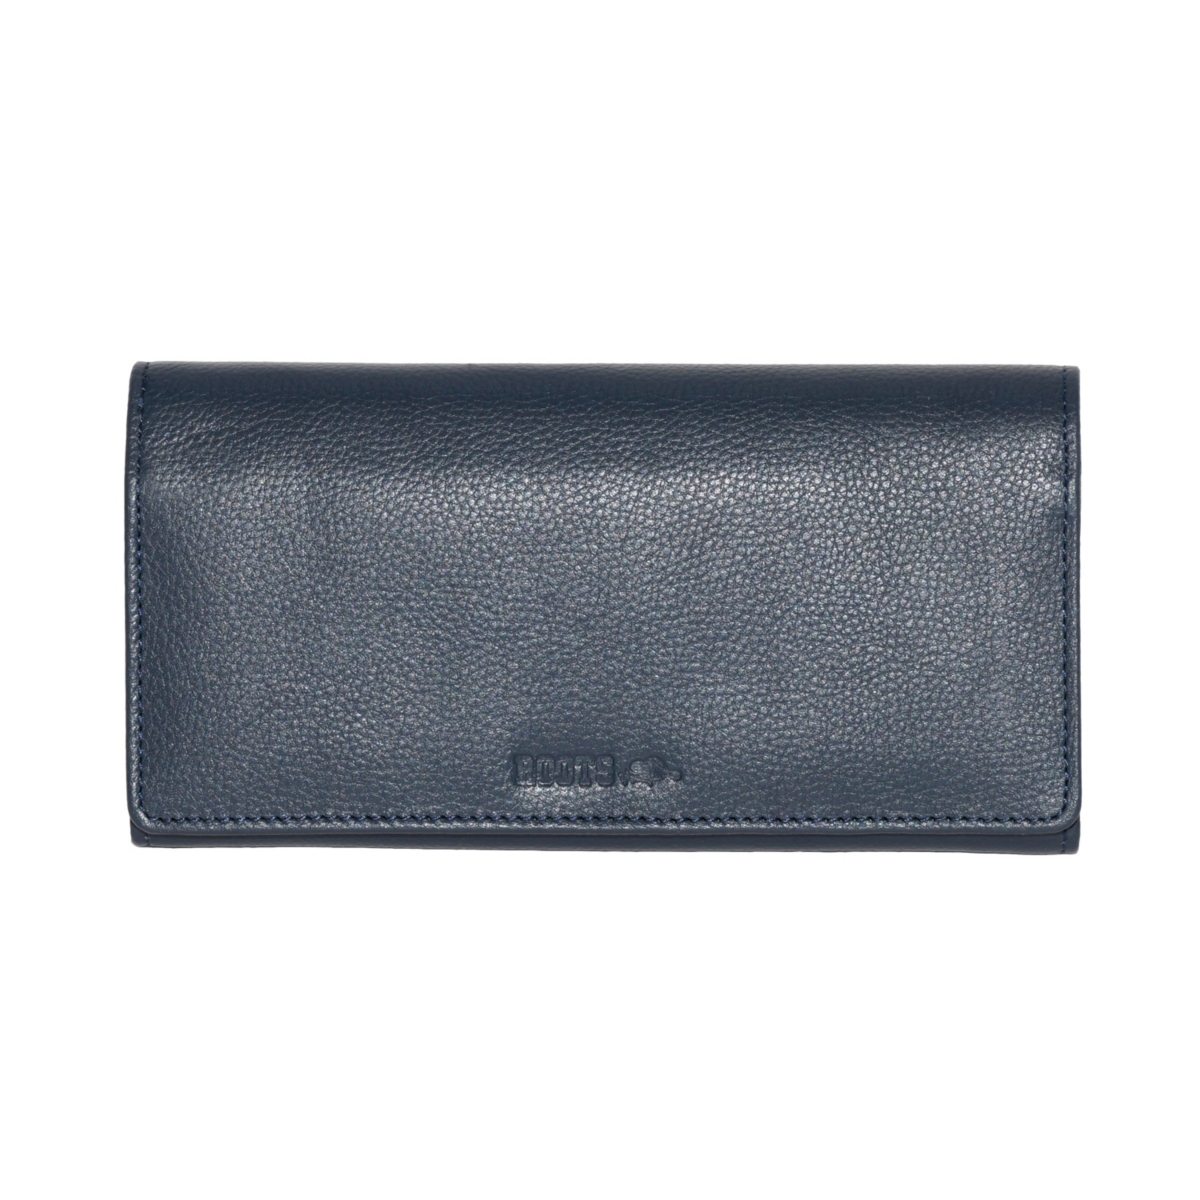 Ladies Large Clutch Wallet w/ Removable Checkbook - Navy